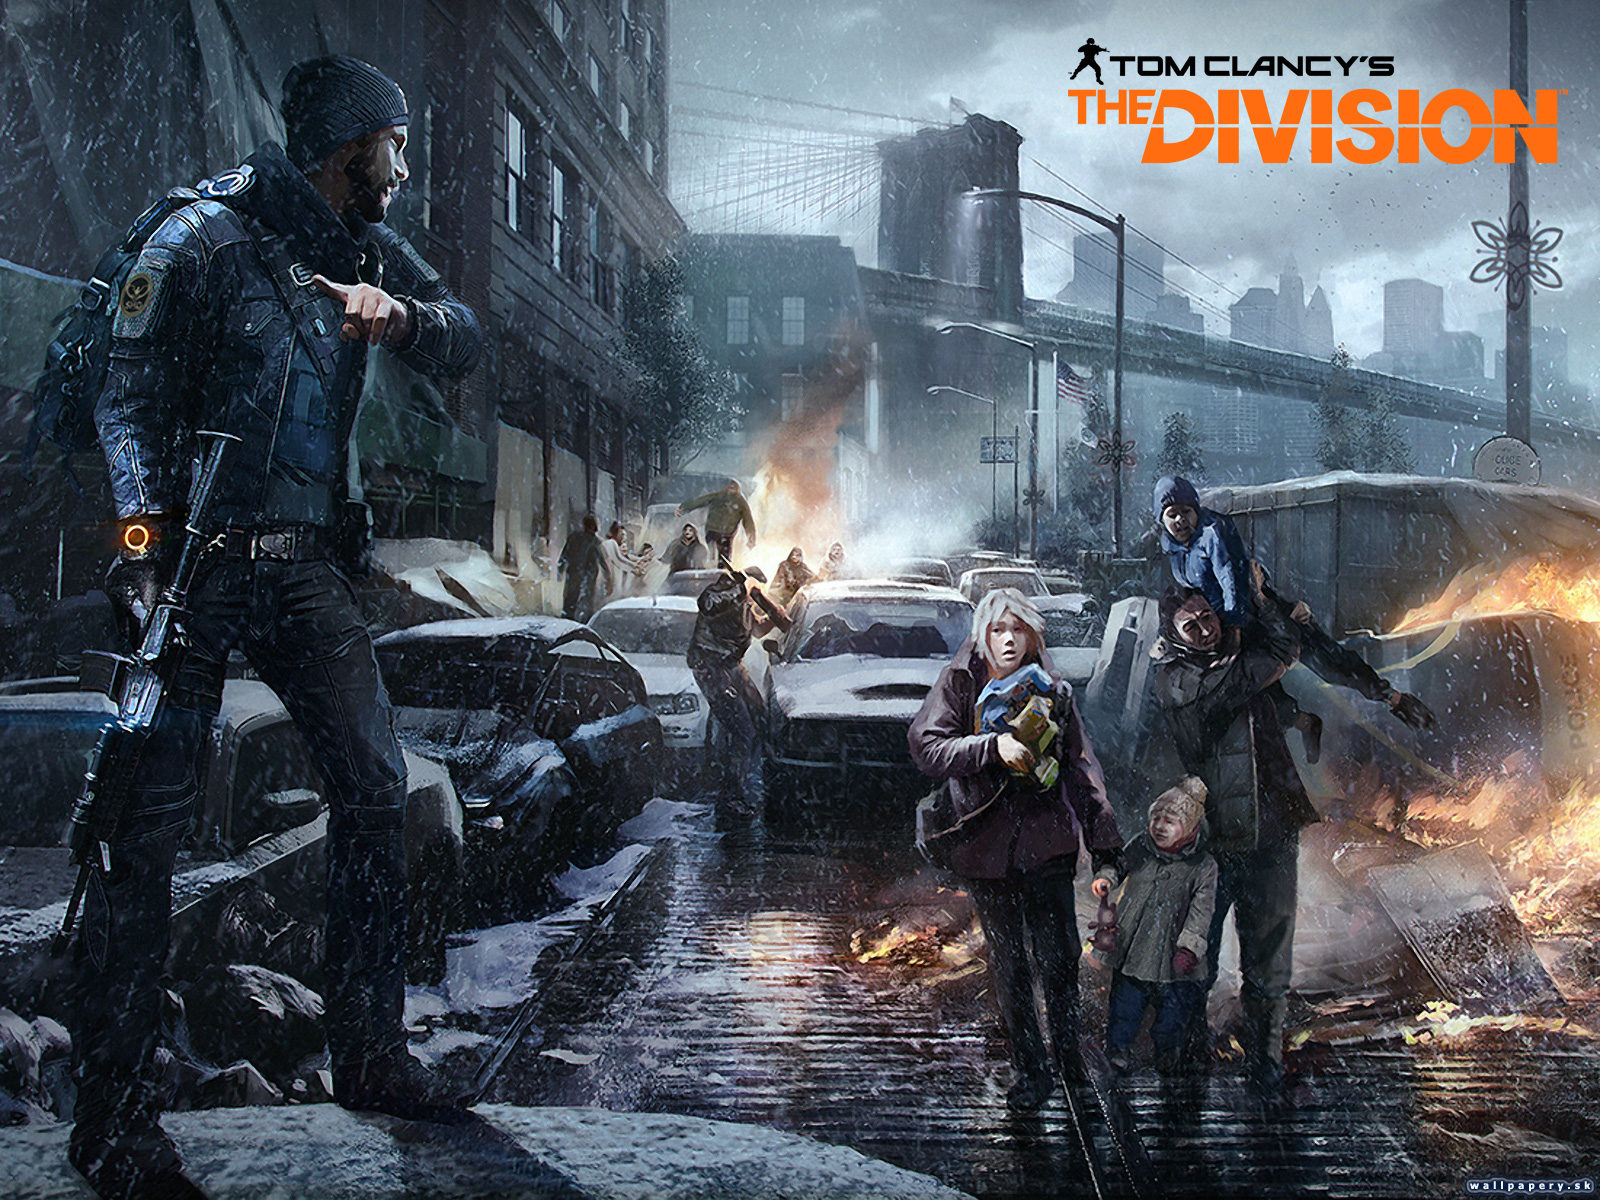 The Division - wallpaper 4